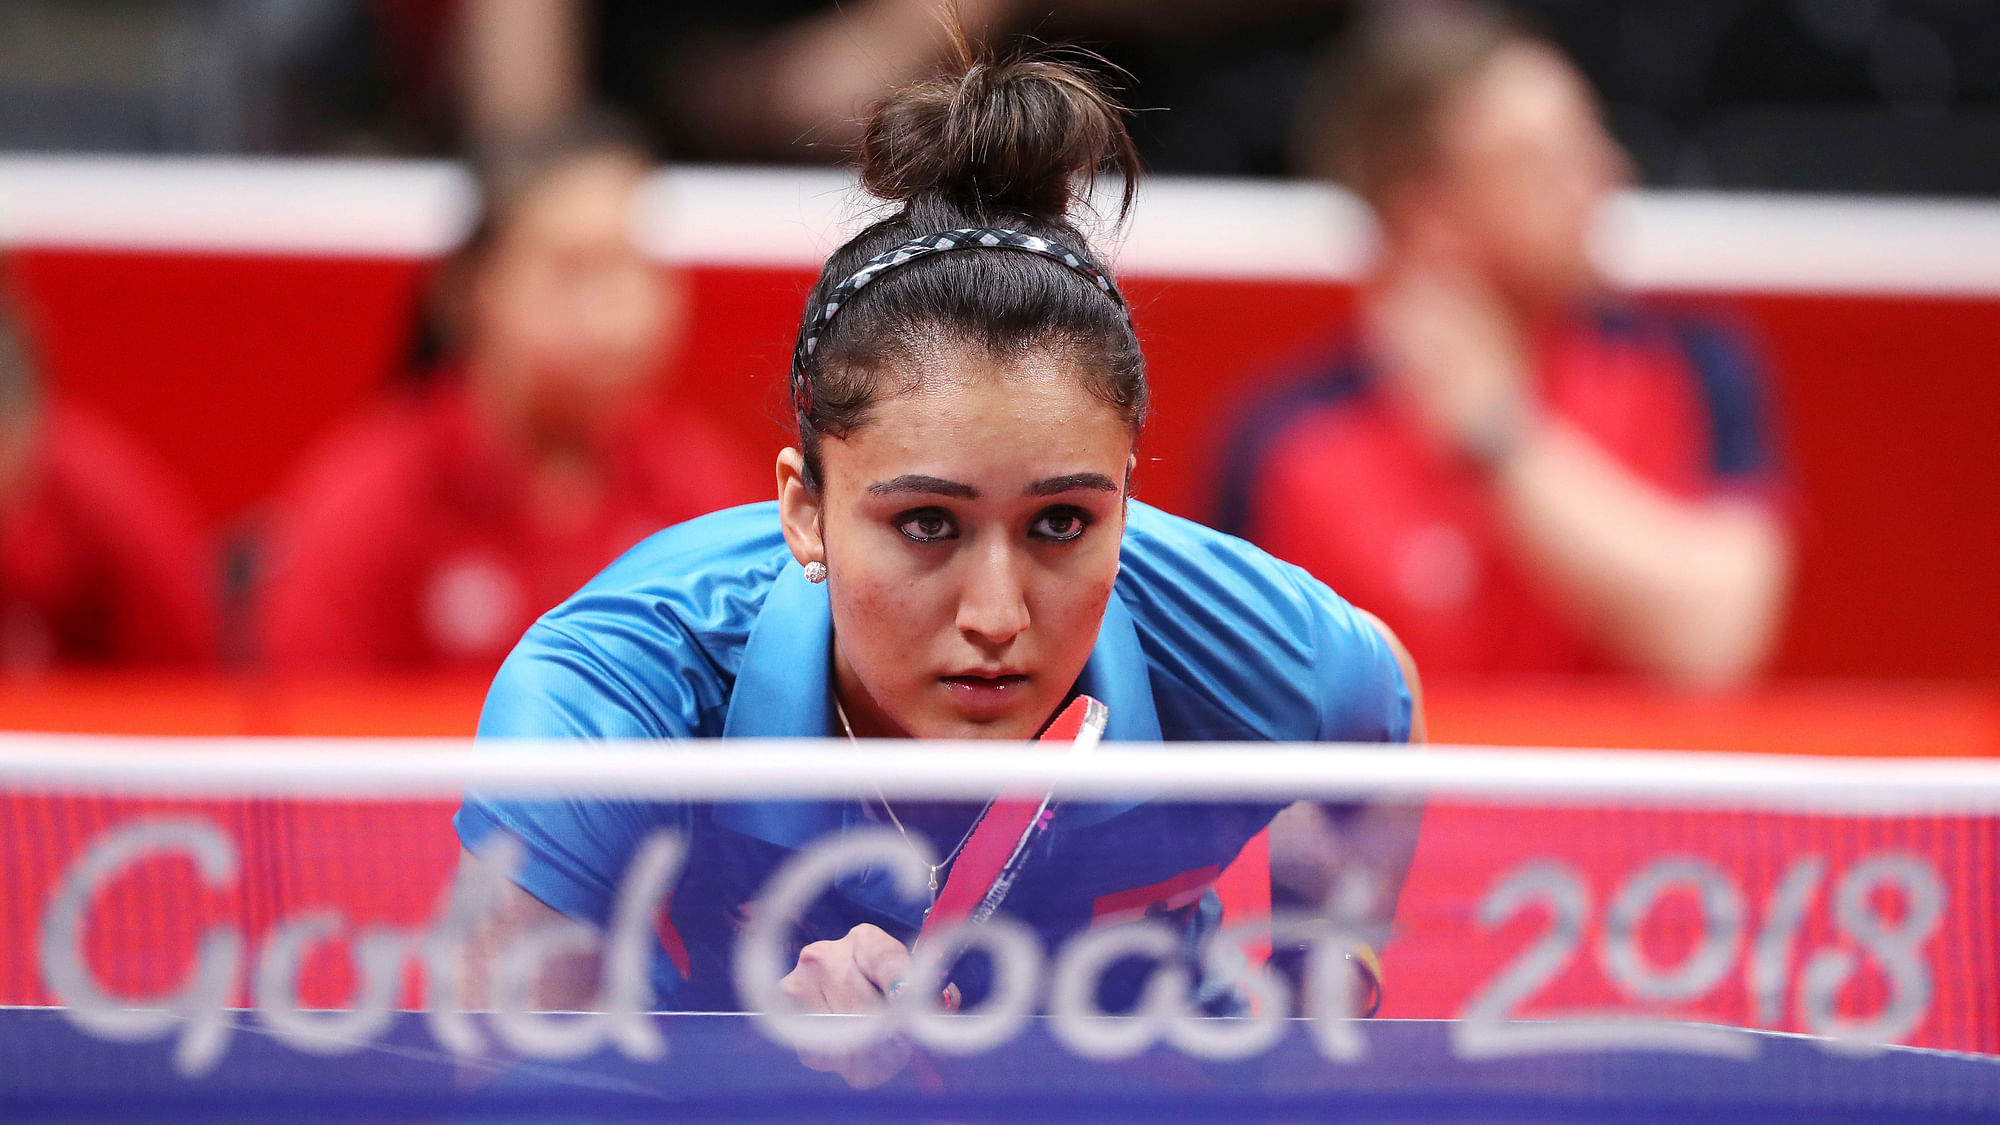 India’s Manika Batra prepares to return serve during a match at the 2018 Commonwealth Games at the Oxenford Studios on the Gold Coast, Australia, Thursday, April 5, 2018.&nbsp;